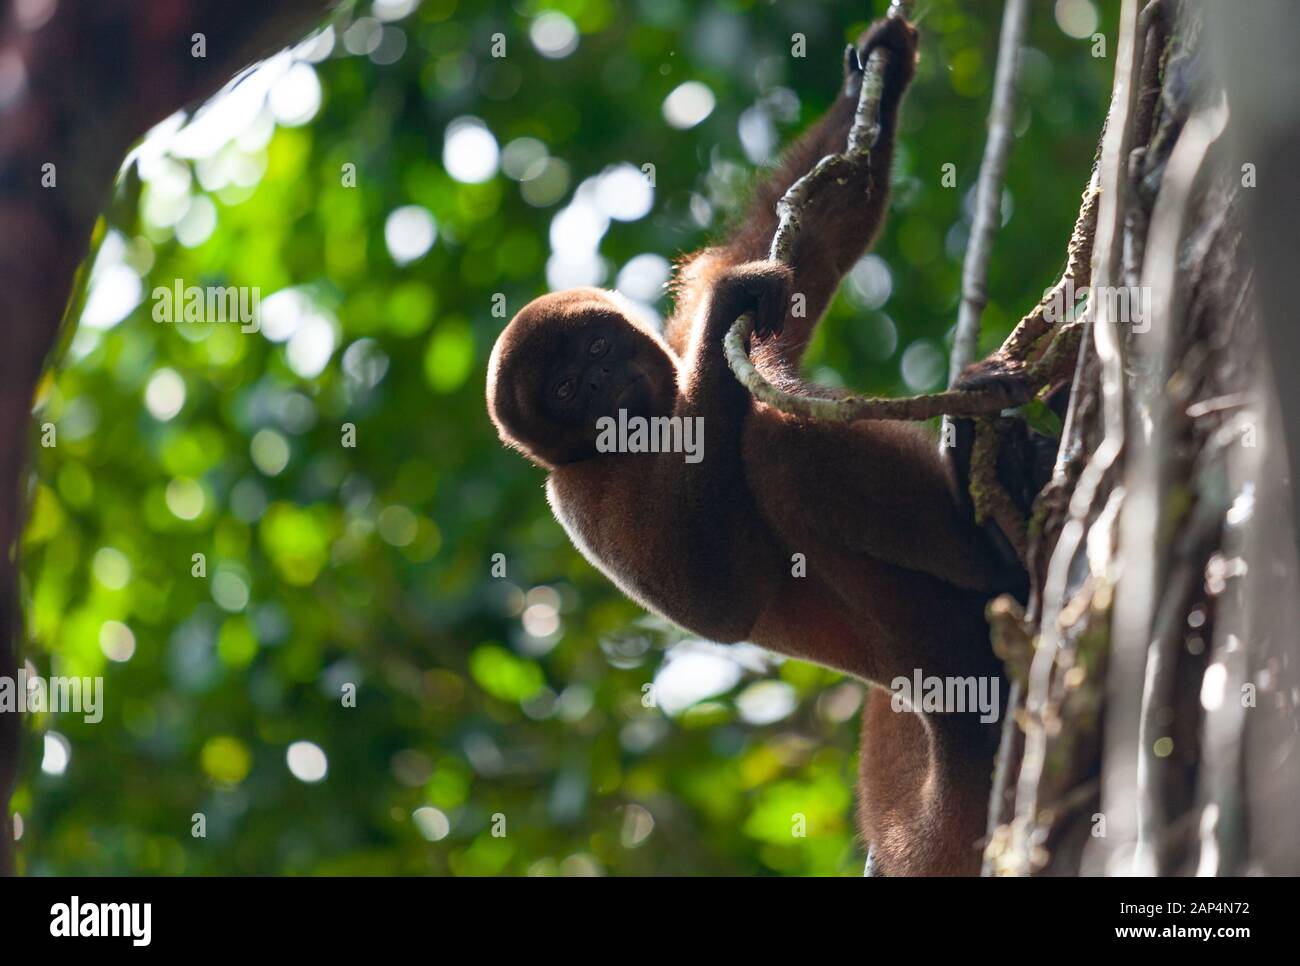 Woolen monkey in nature, sitting on a tree, Amazon river. Stock Photo